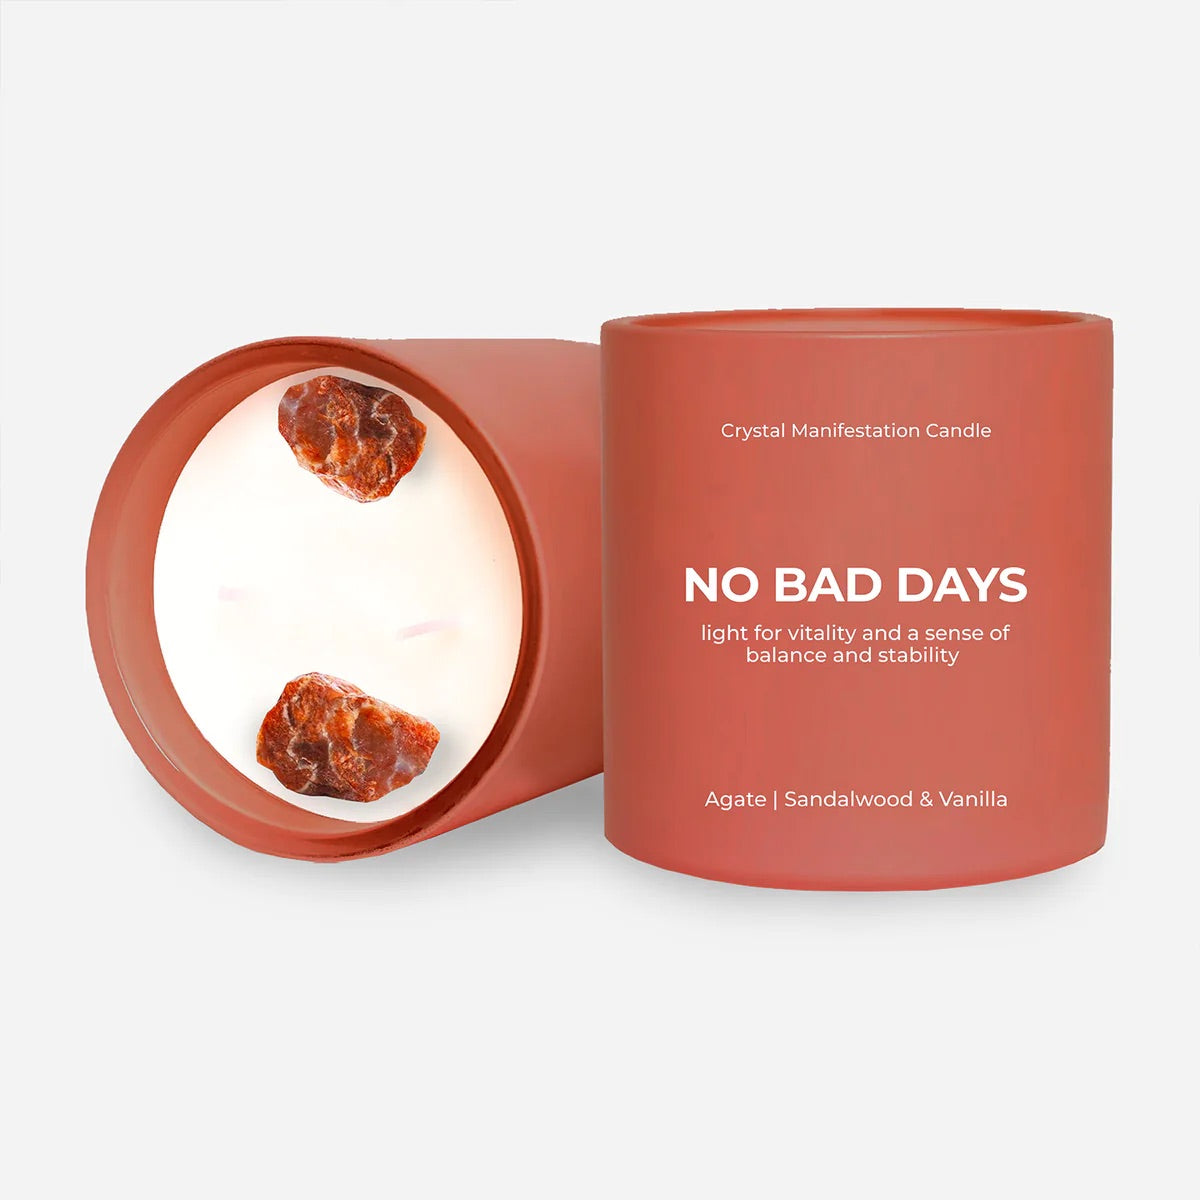 No Bad Days: Crystal Manifestation Candle - Orchid Noir scented with Agate